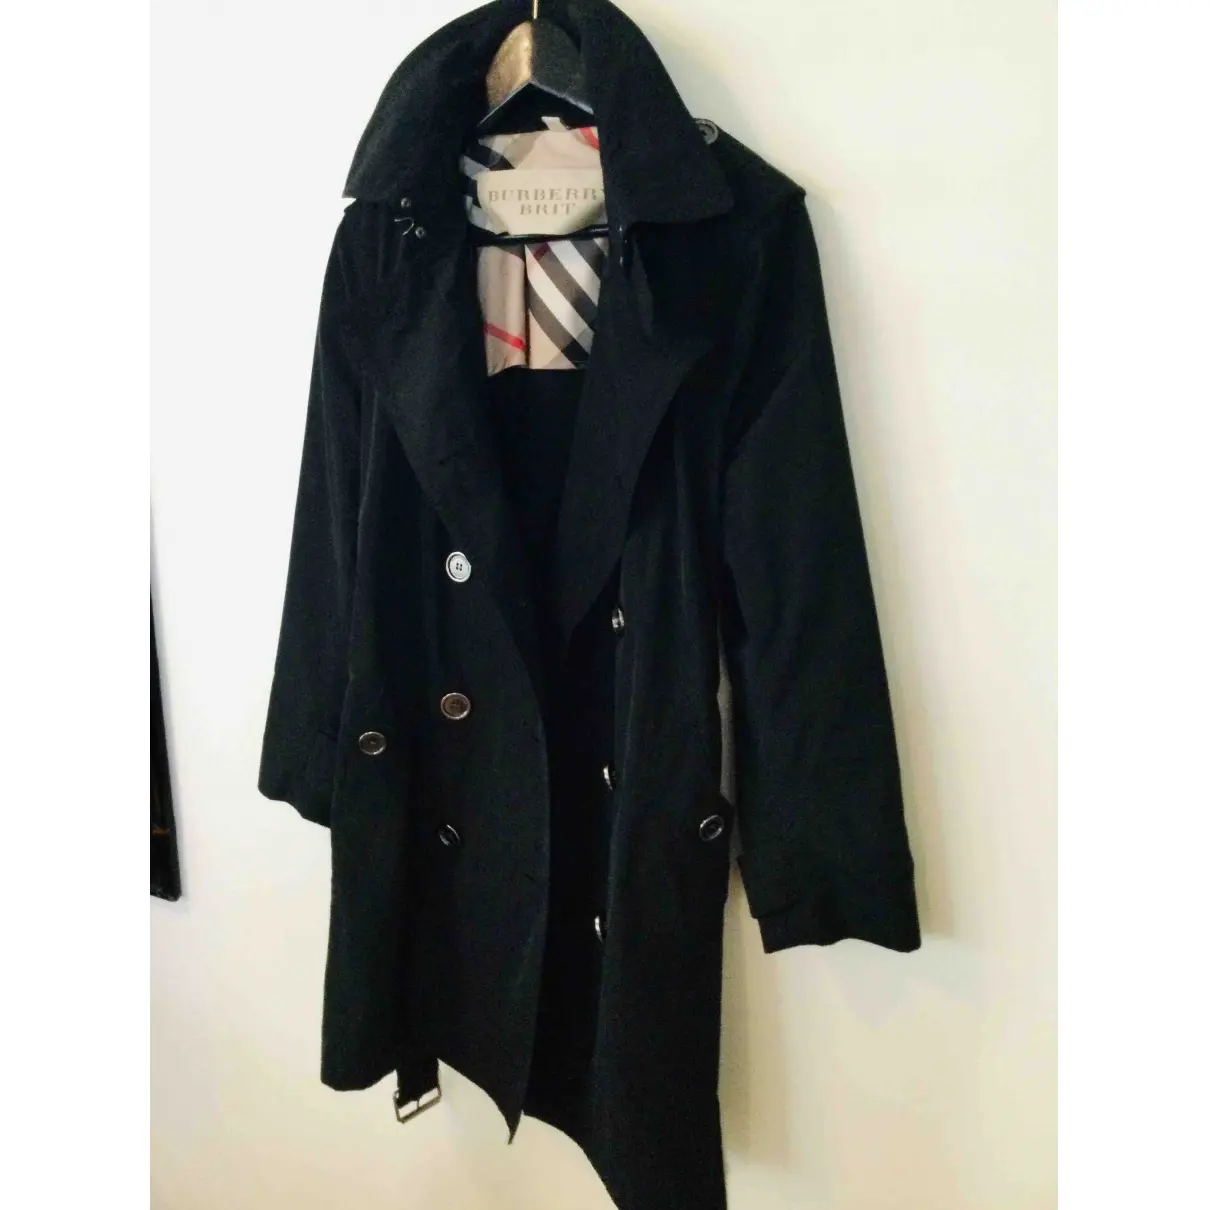 Buy Burberry Black Polyester Trench coat online